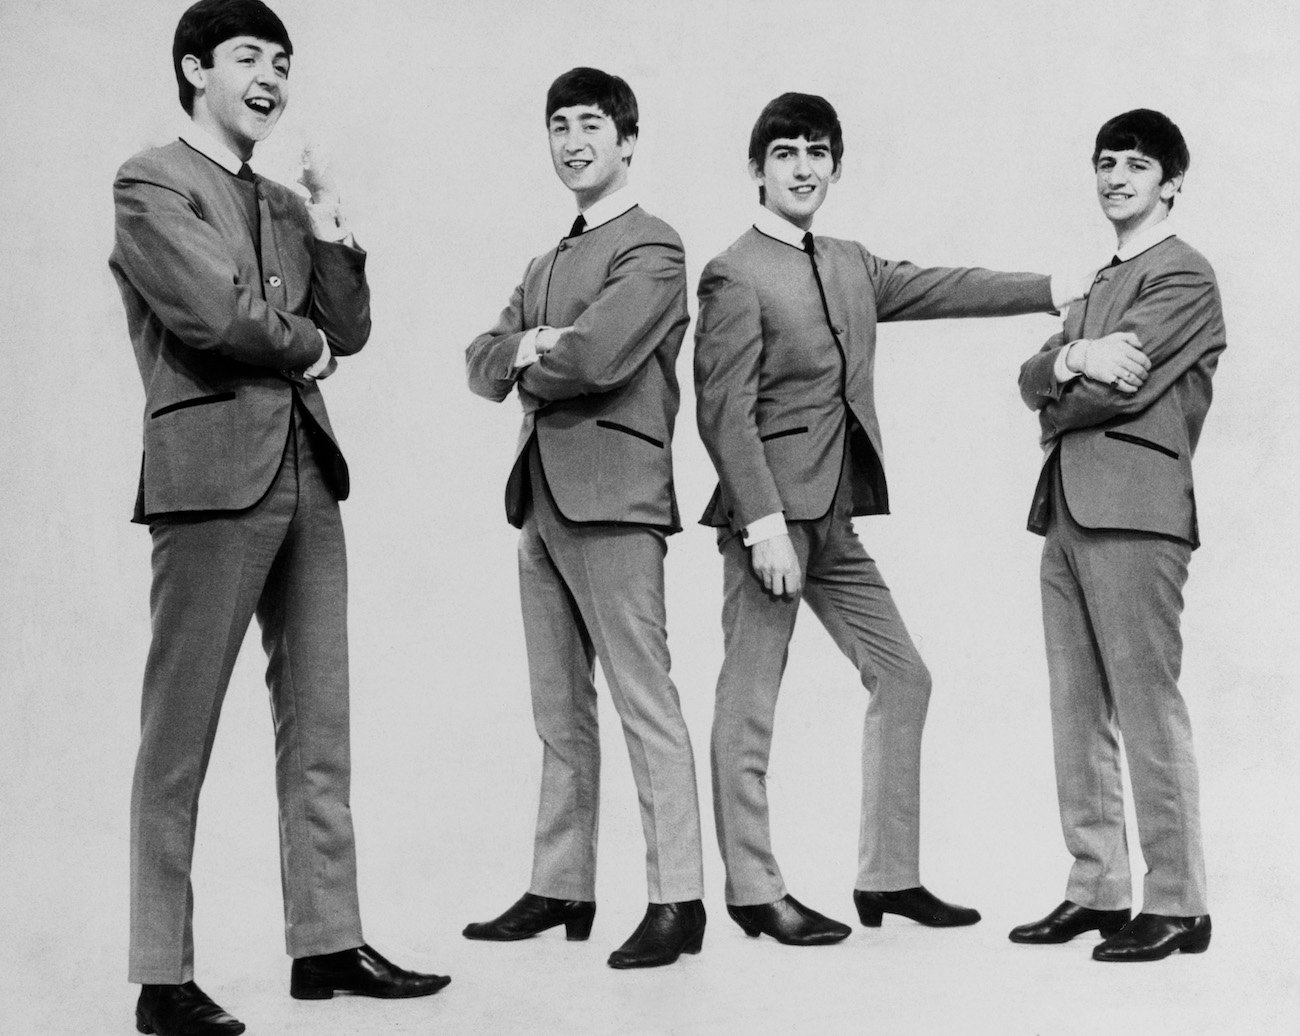 George Harrison Revealed The Beatles Stole a Bit of a Stereos Hit for 1 of Their First Songs